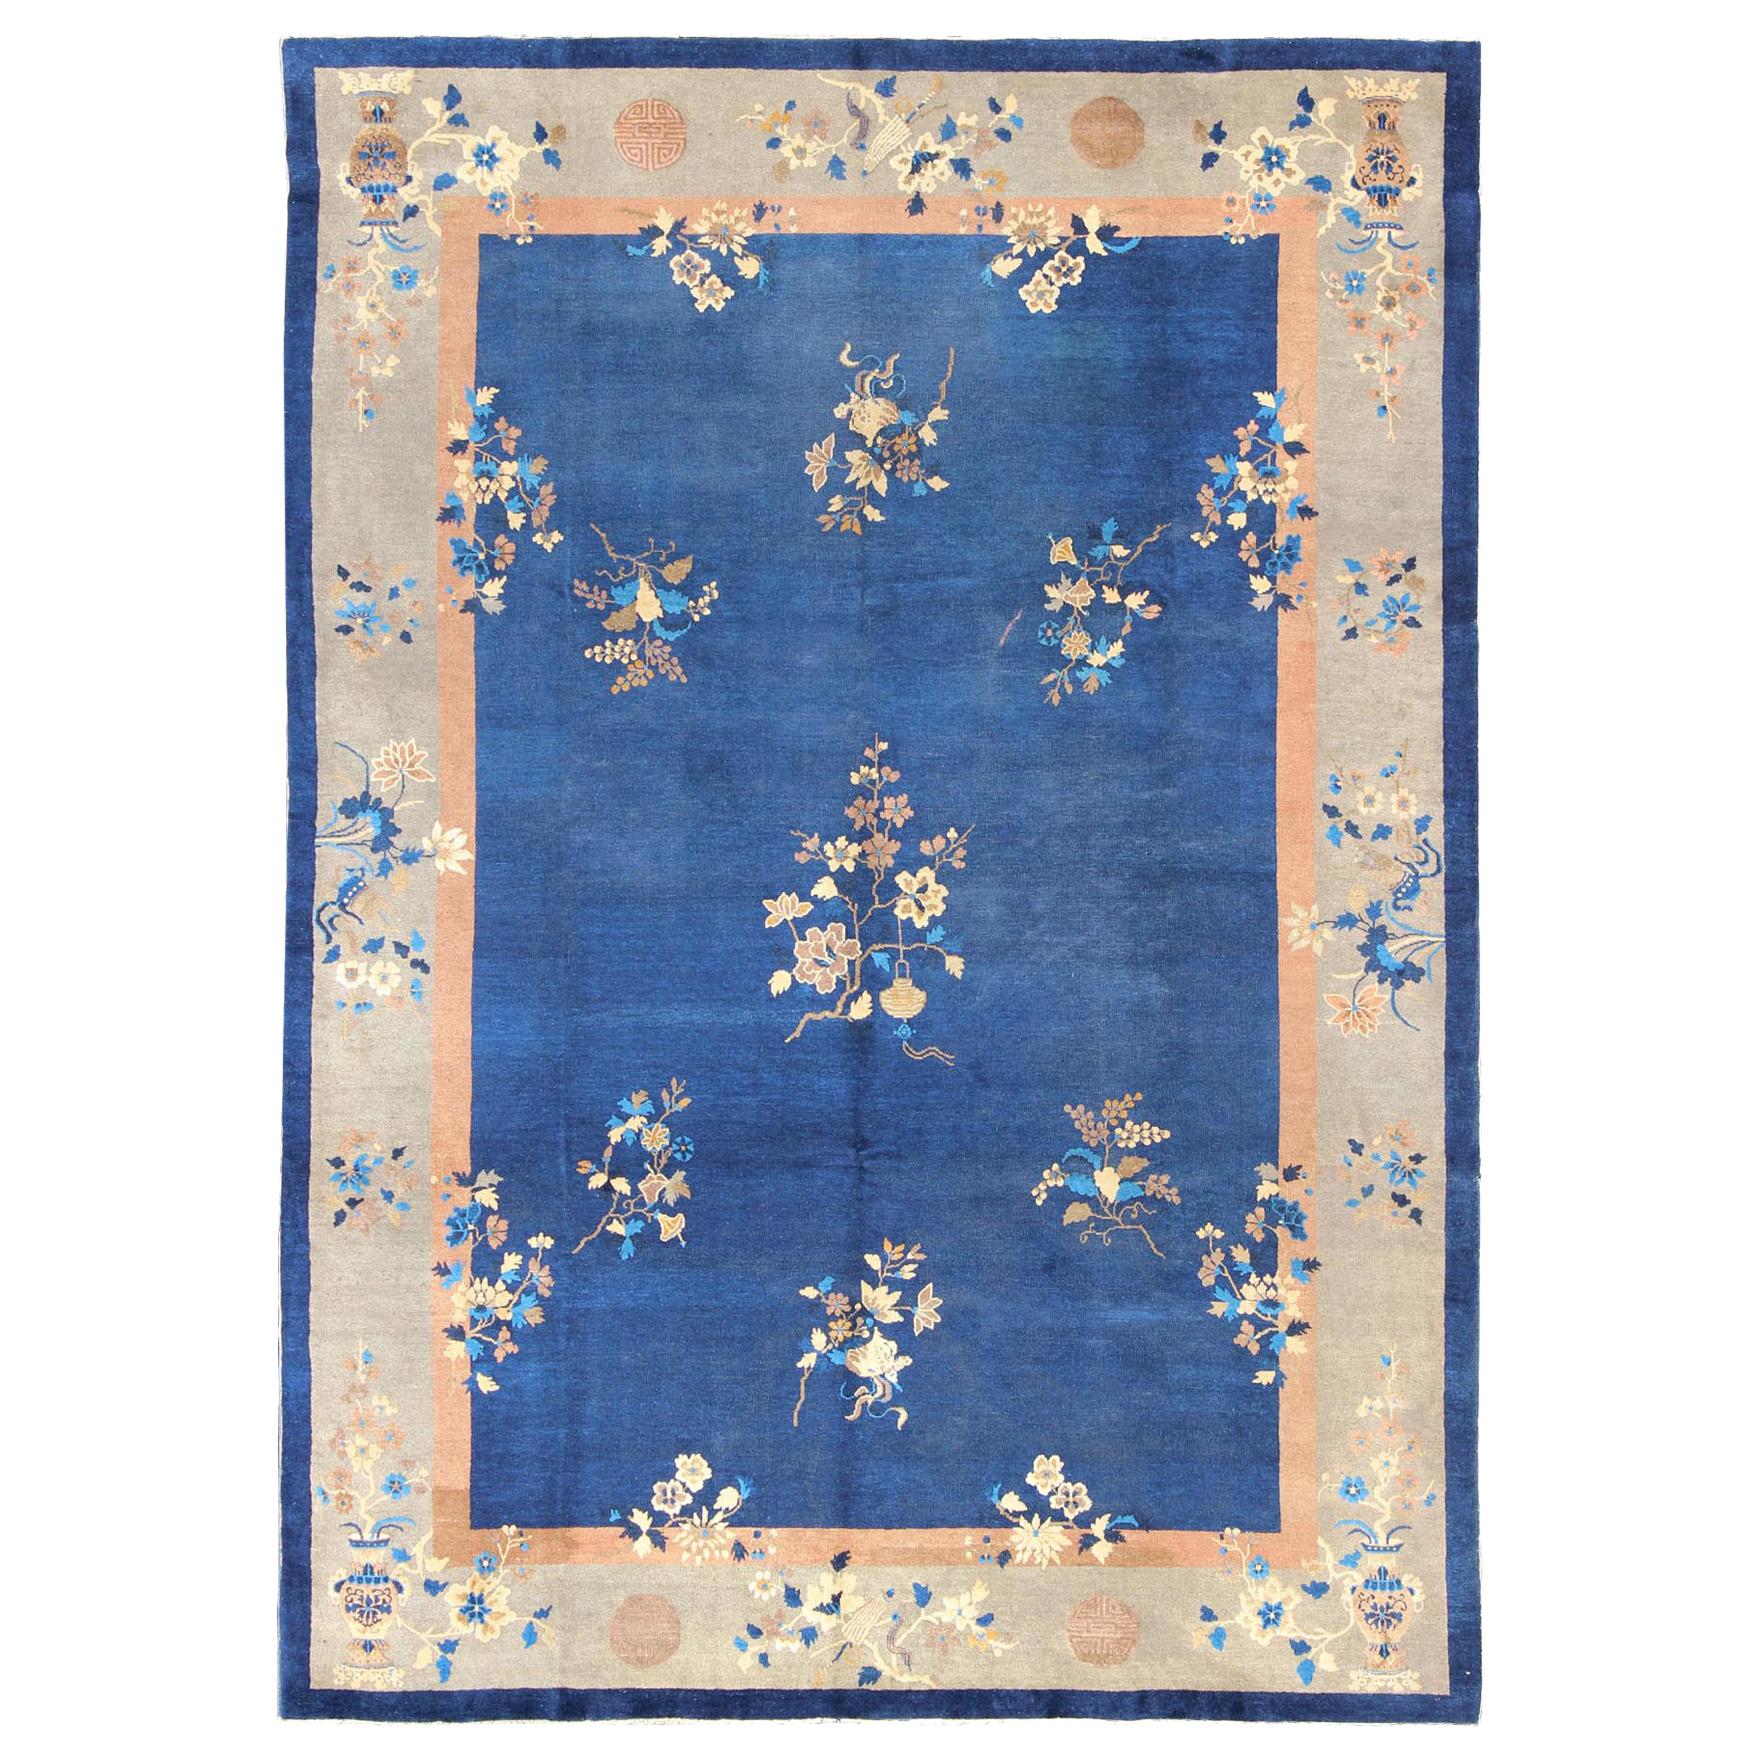 Large Antique Chinese Pecking Rug with Flowers and Vases in Navy Blue and Tan For Sale